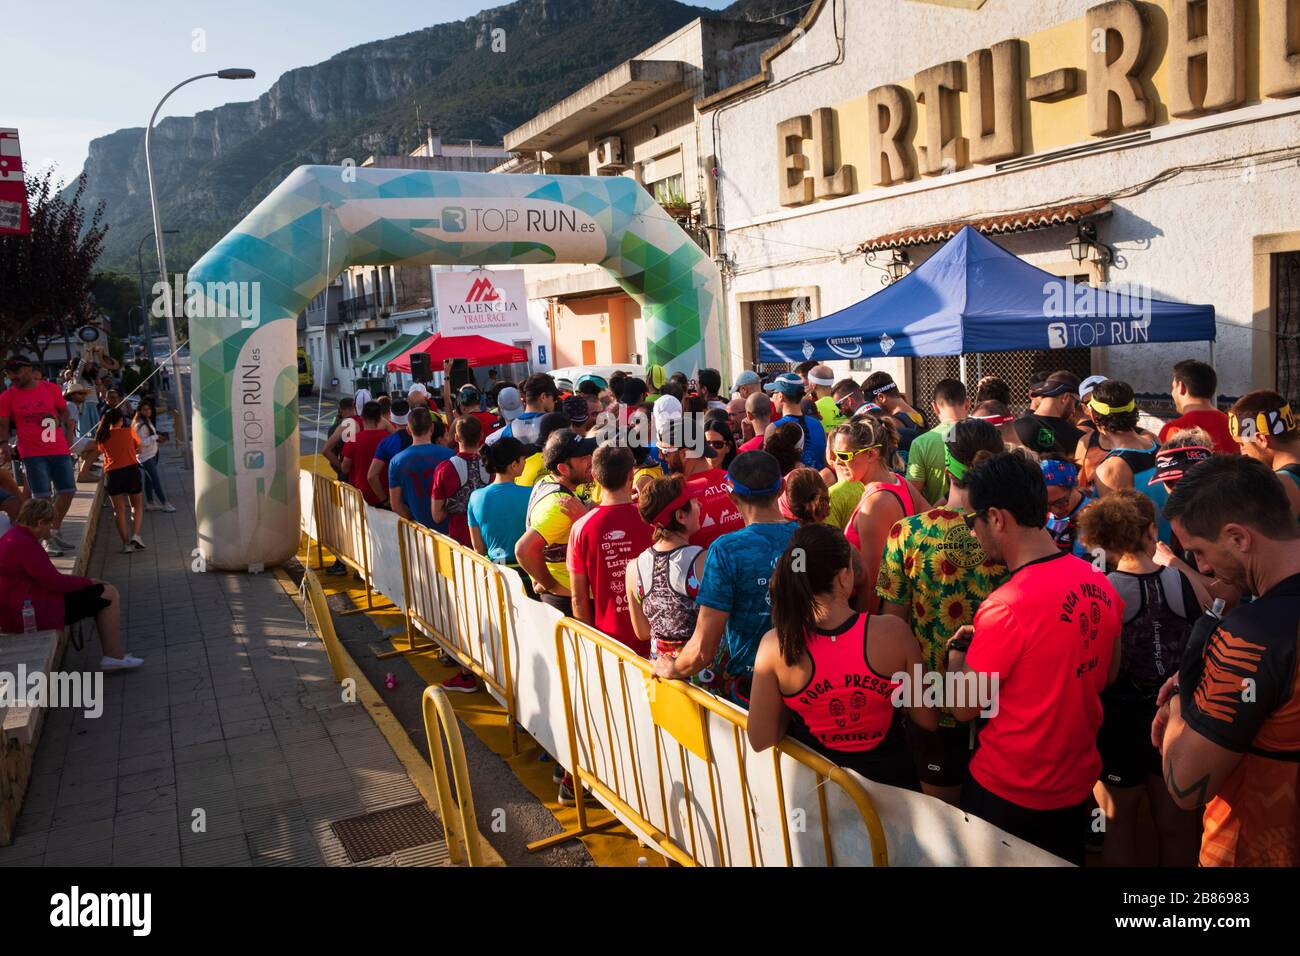 Runners waiting for the start of cross country race in the La Safor Mountains of Spain Stock Photo